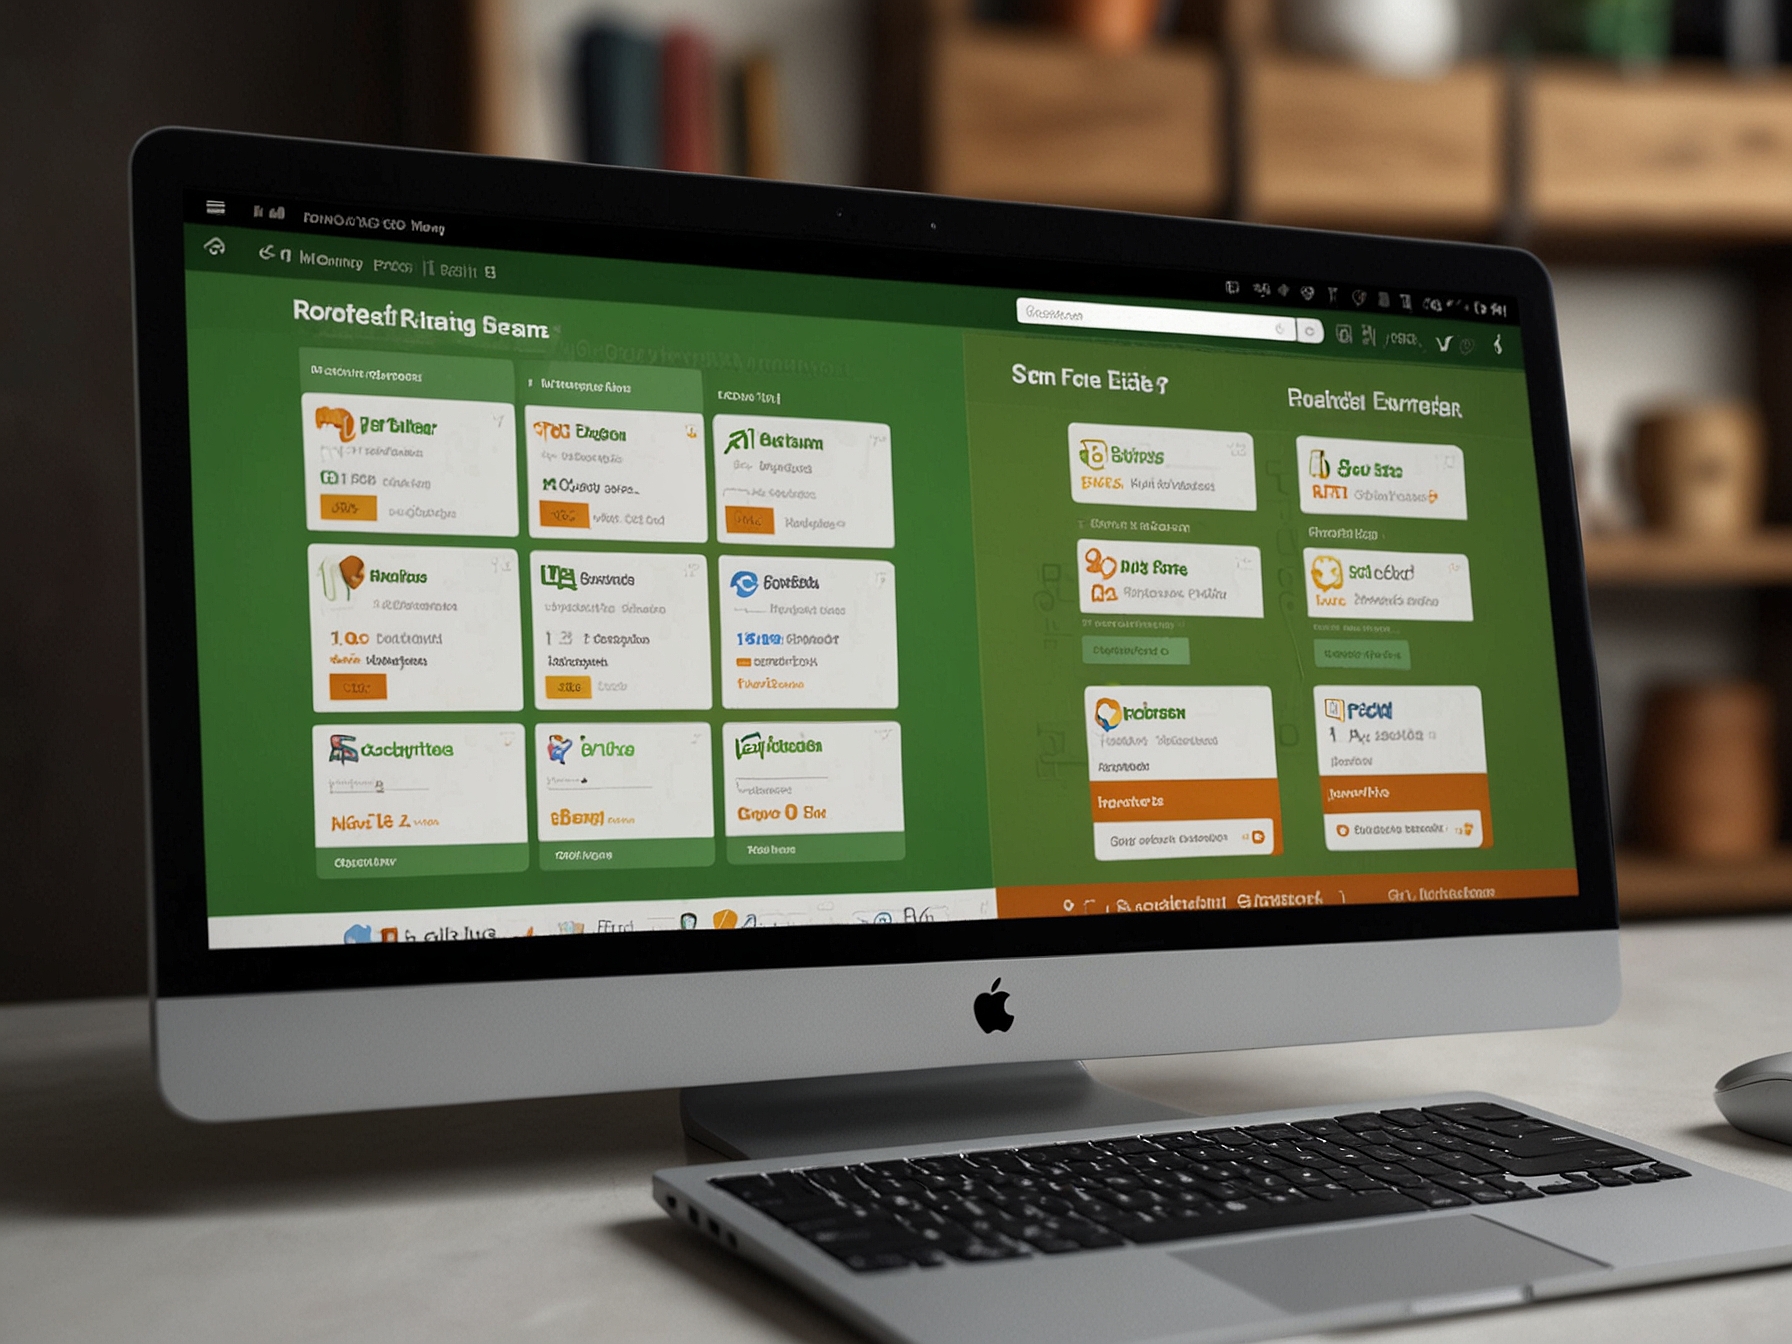 A user-friendly interface of GoDaddy's domain search tool displaying a variety of domain name options and extensions, showcasing the integration with SEO and industry keywords.